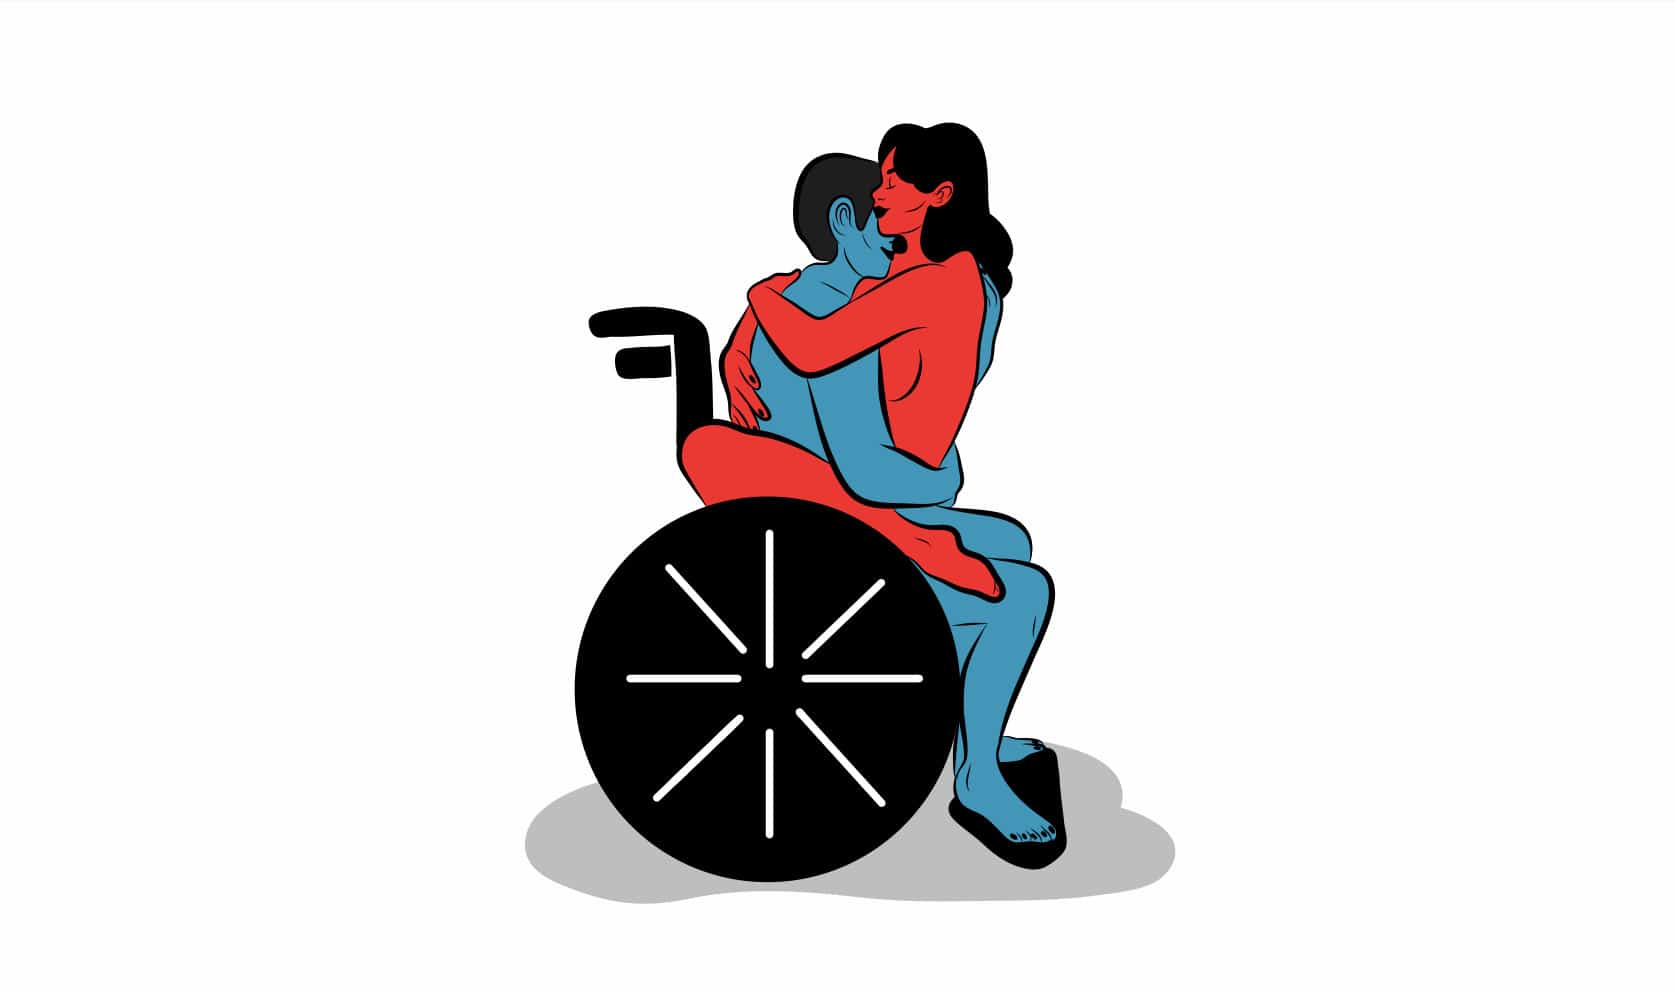 A graphic of a man and woman on a wheelchair being intimate